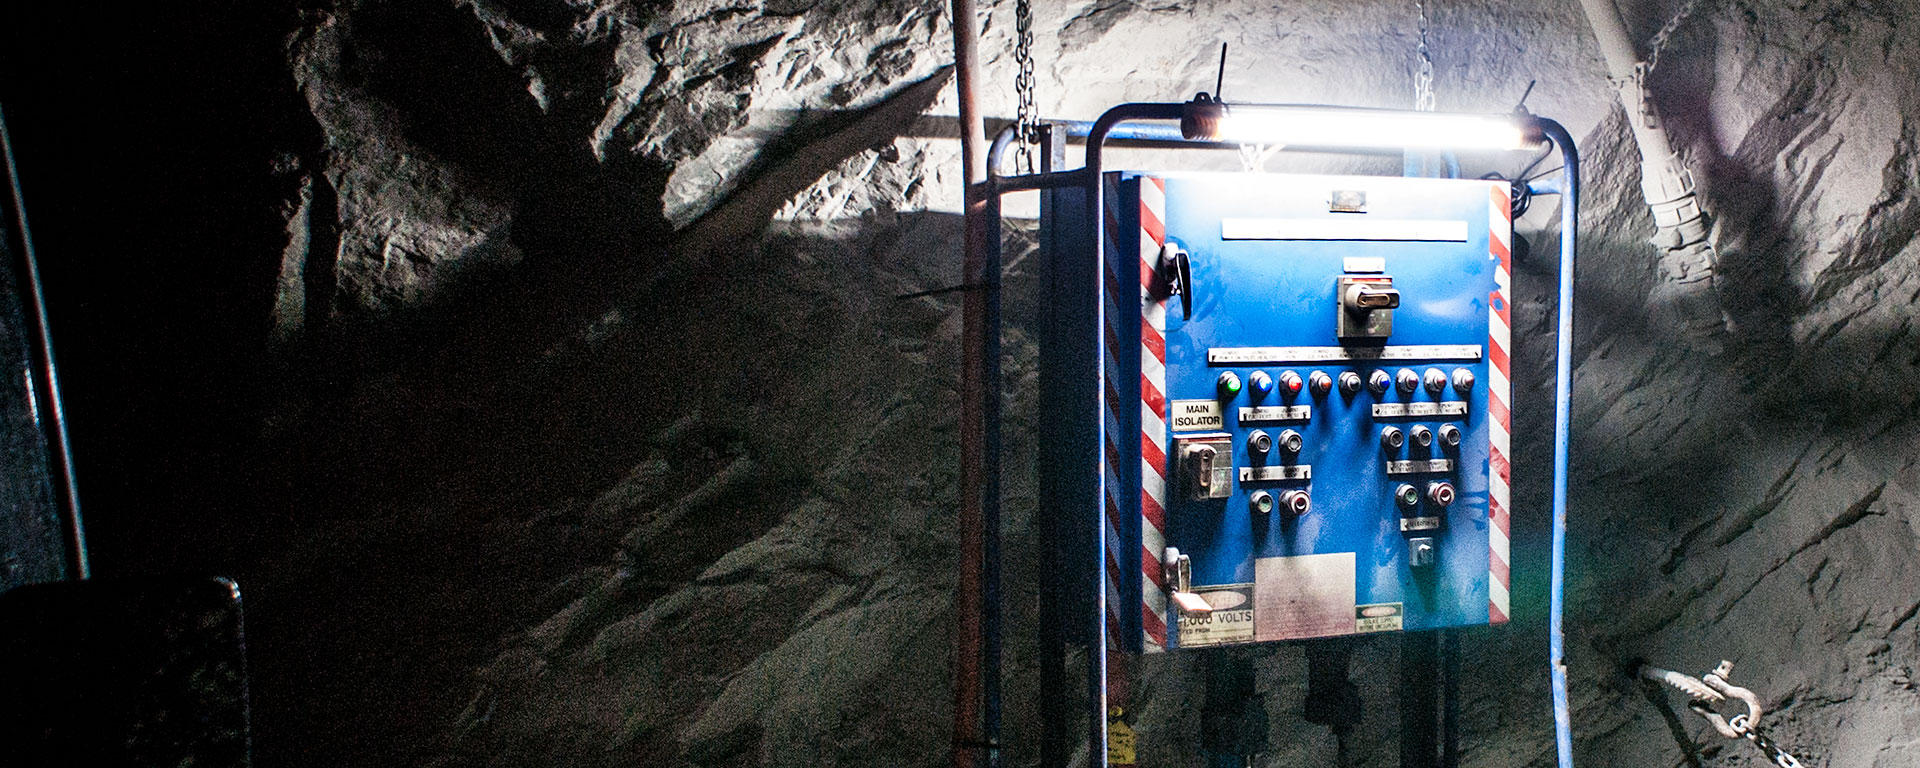 AC2 Mining Lead Light in application, installed in an underground mine